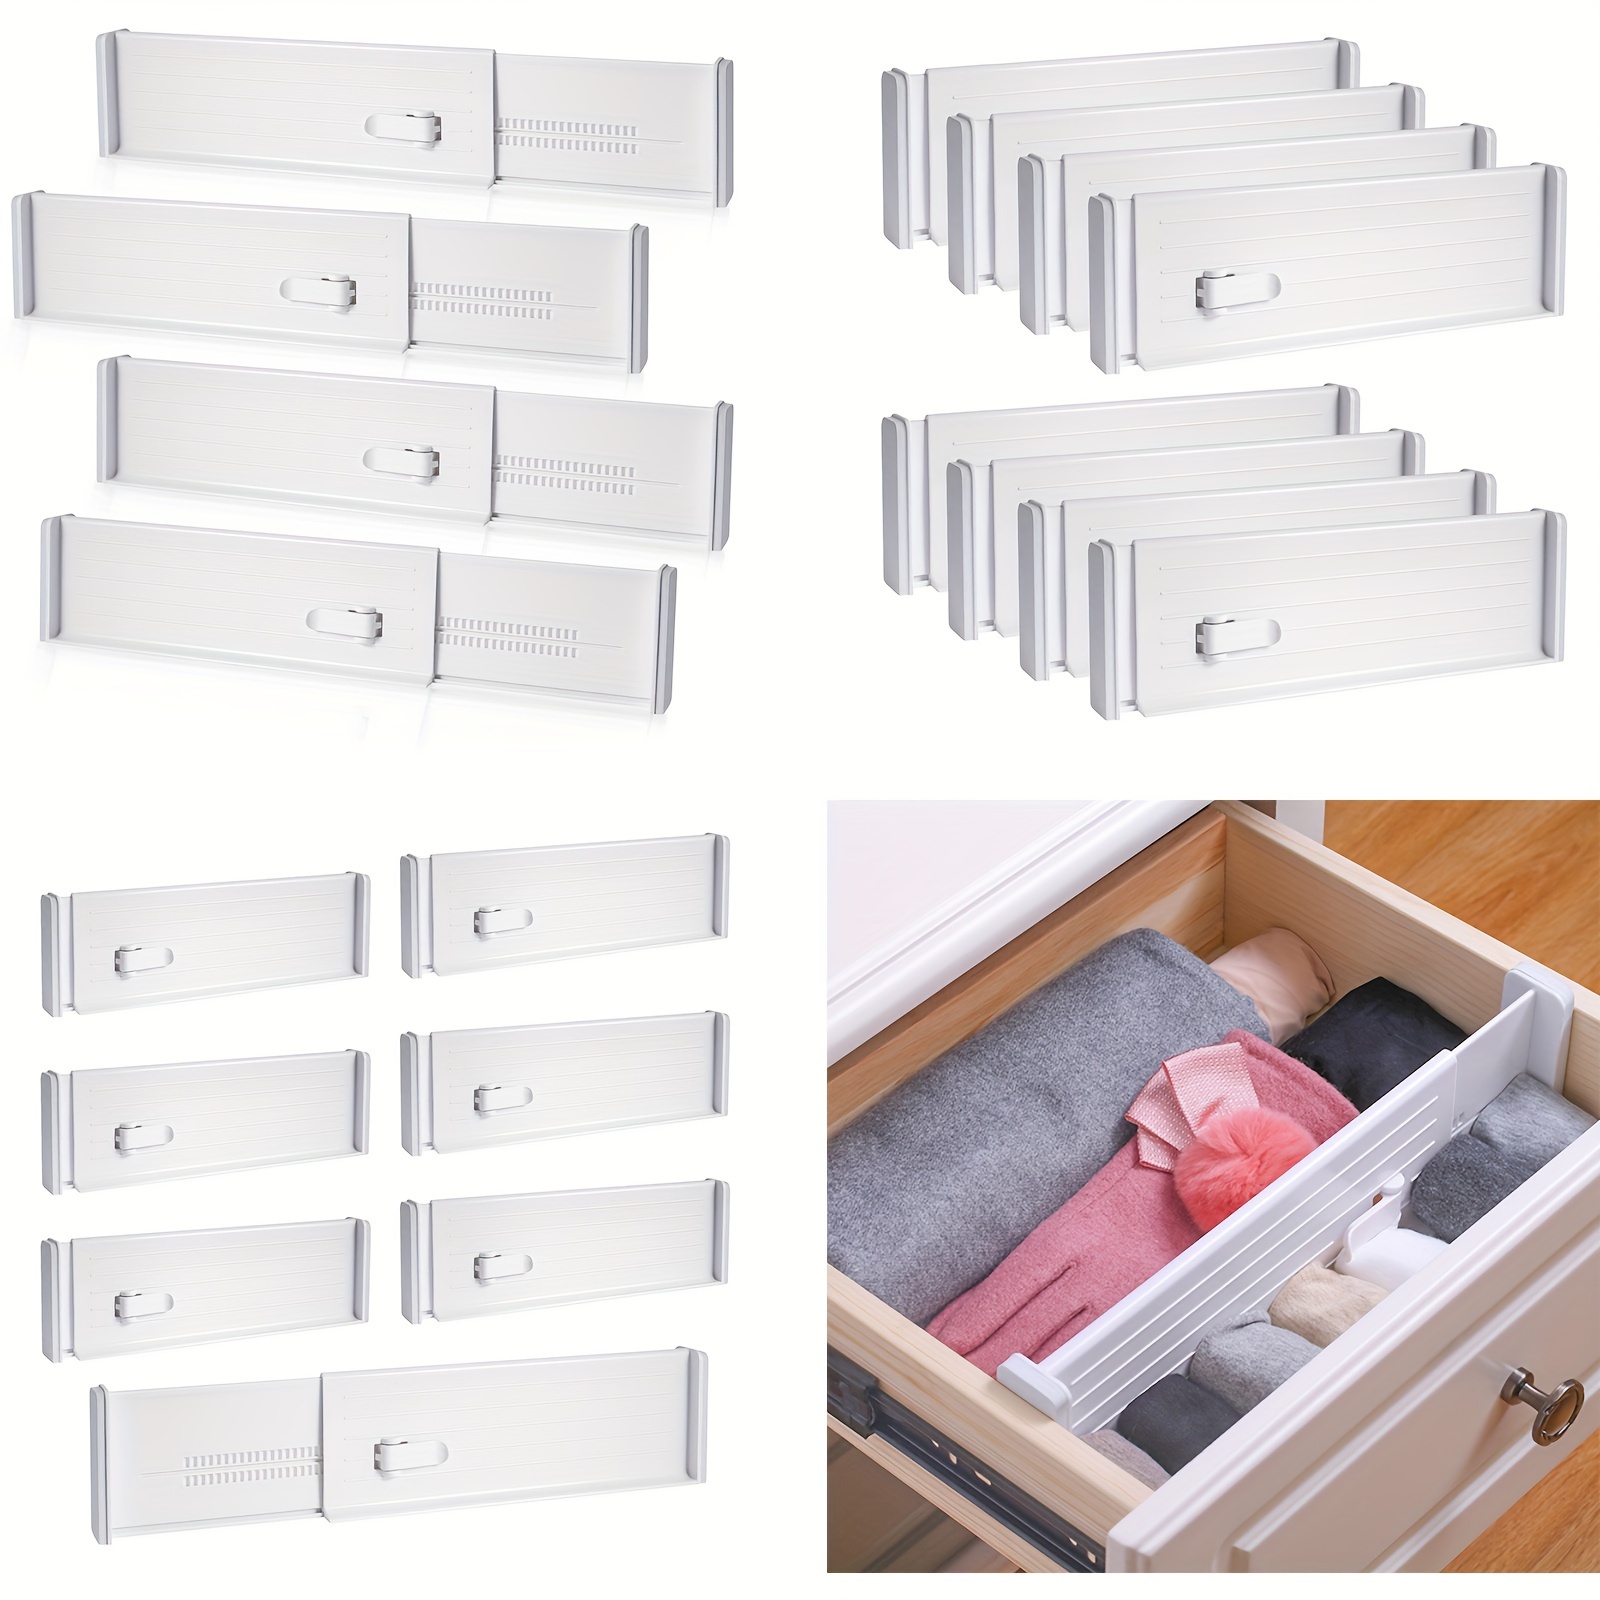 

Drawer Divider, Adjustable Expandable Drawer Divider For Kitchen, Bedroom, Office And Bathroom, Home Organization And Storage, Home Furnishings